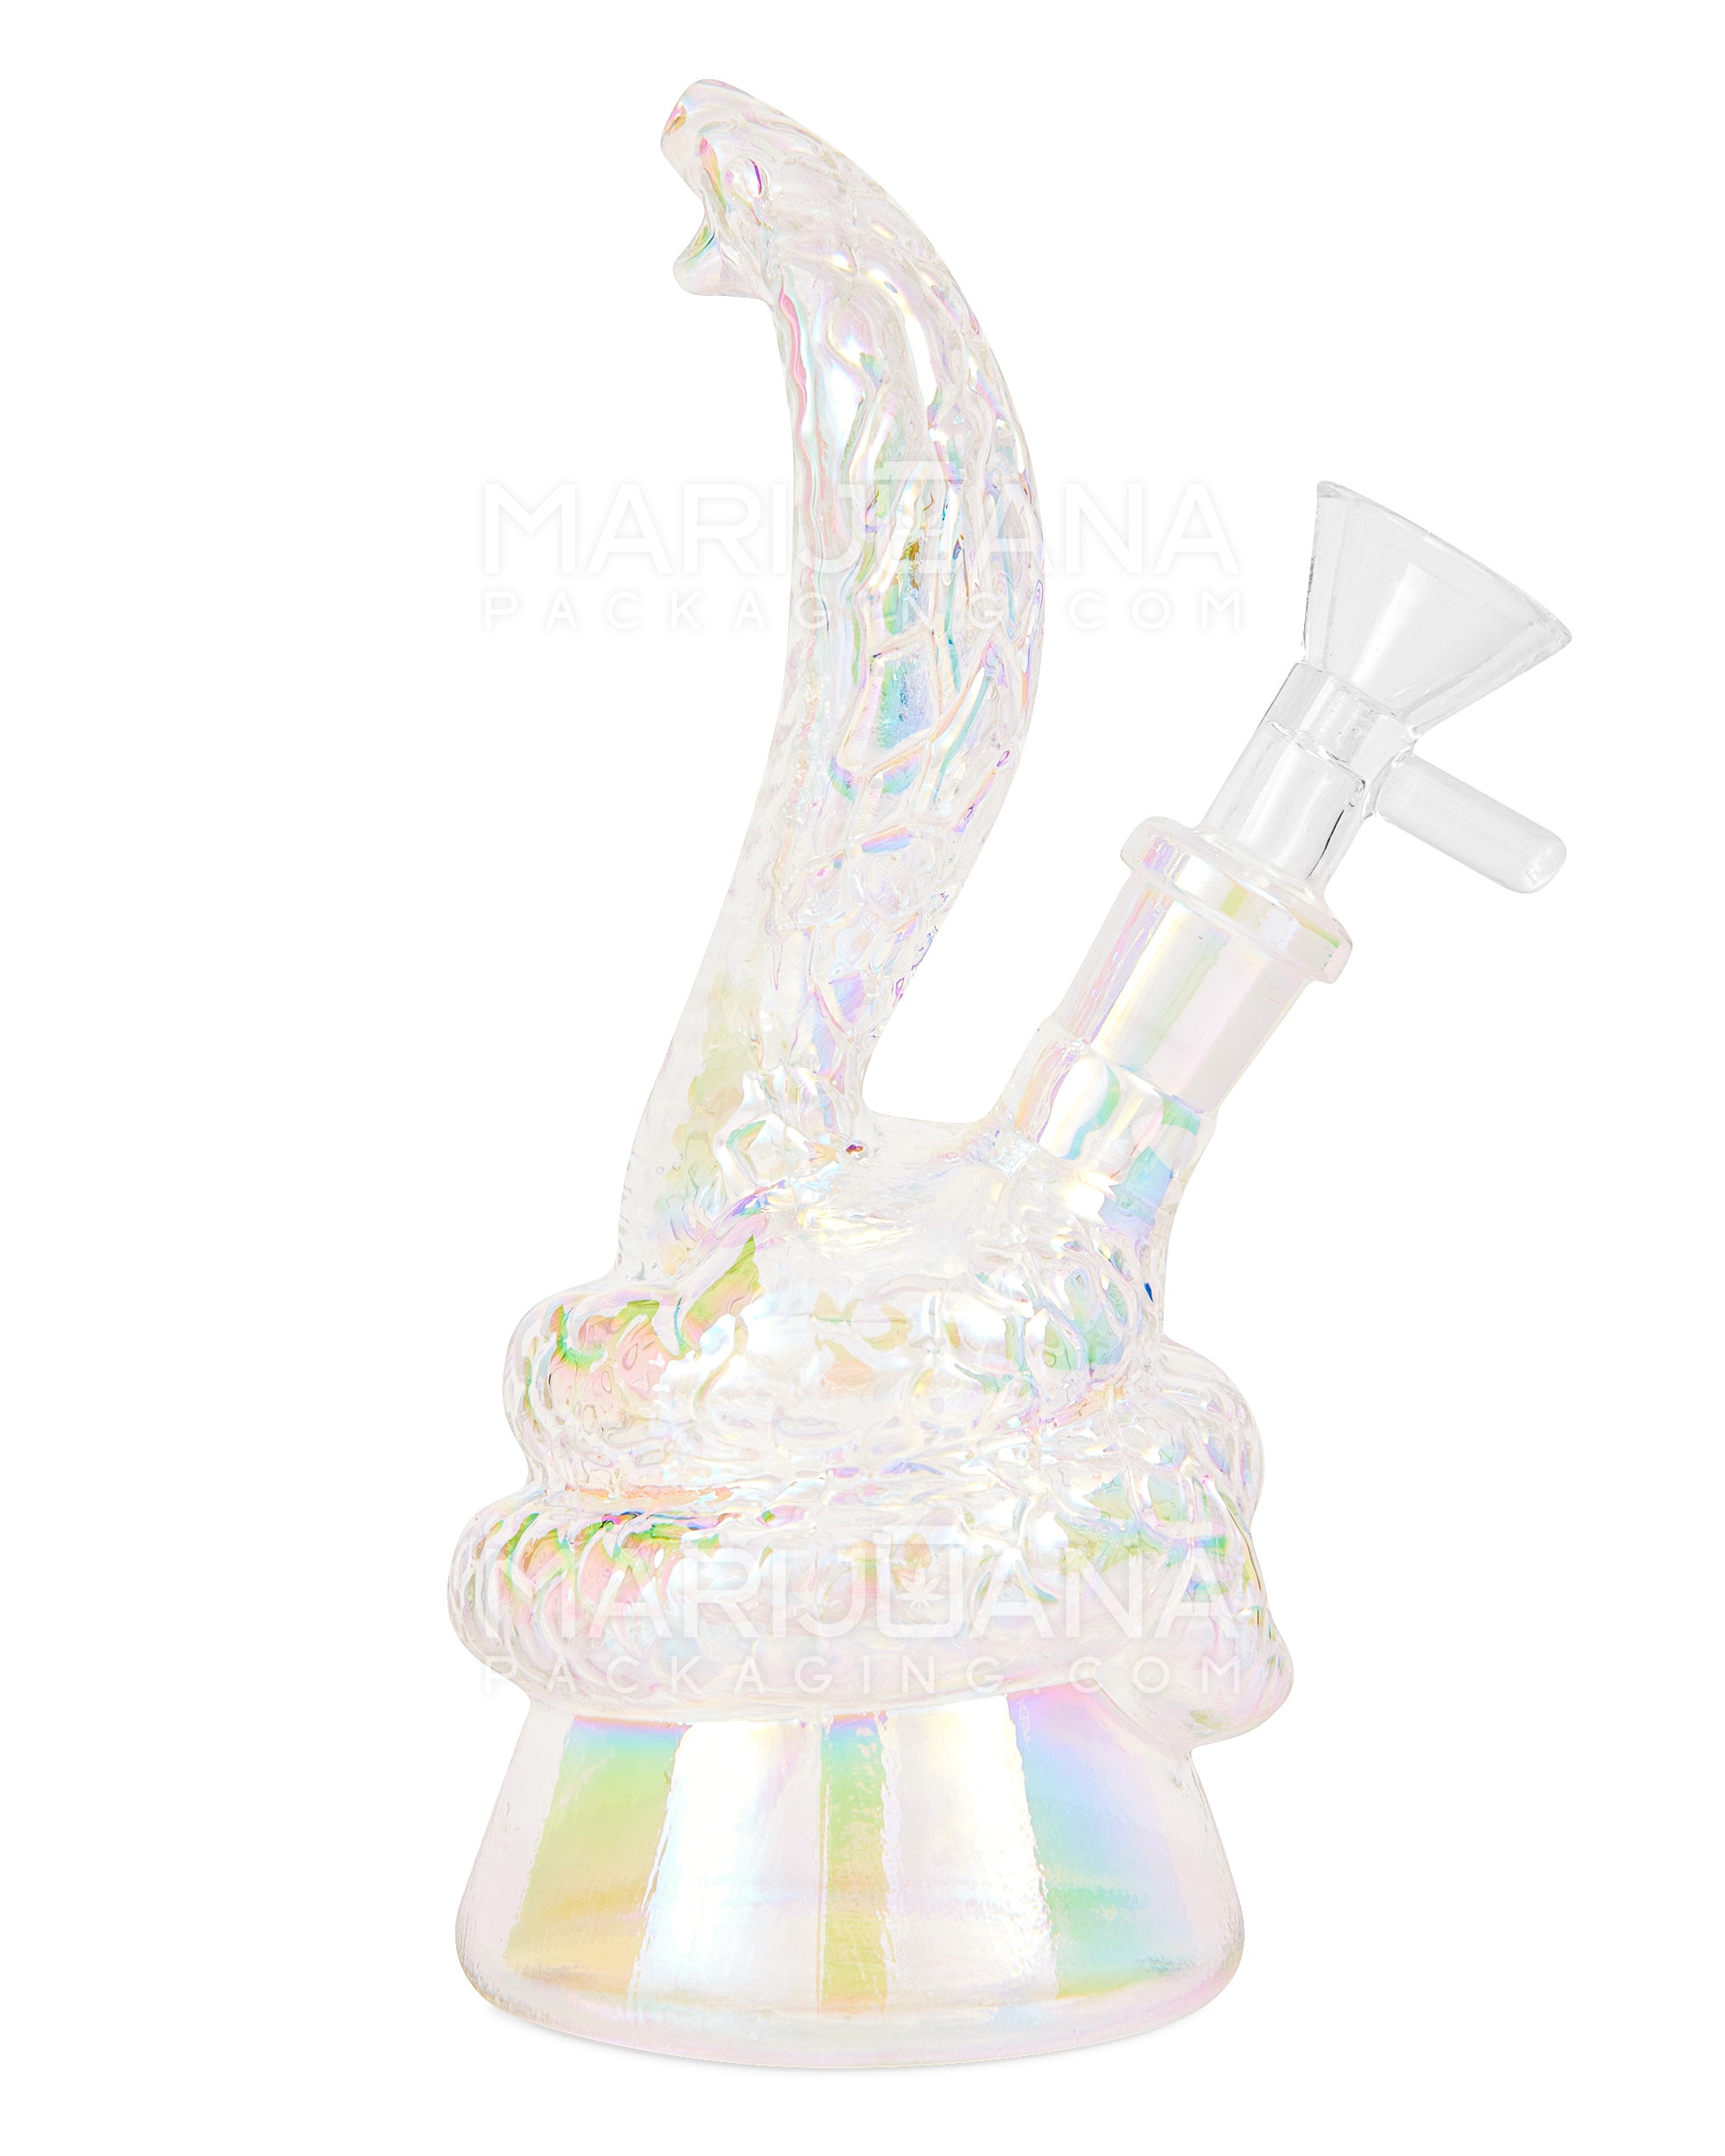 USA Glass | Iridescent Coiled Cobra Glass Water Pipe | 6.5in Tall - 14mm Bowl - Rainbow - 1